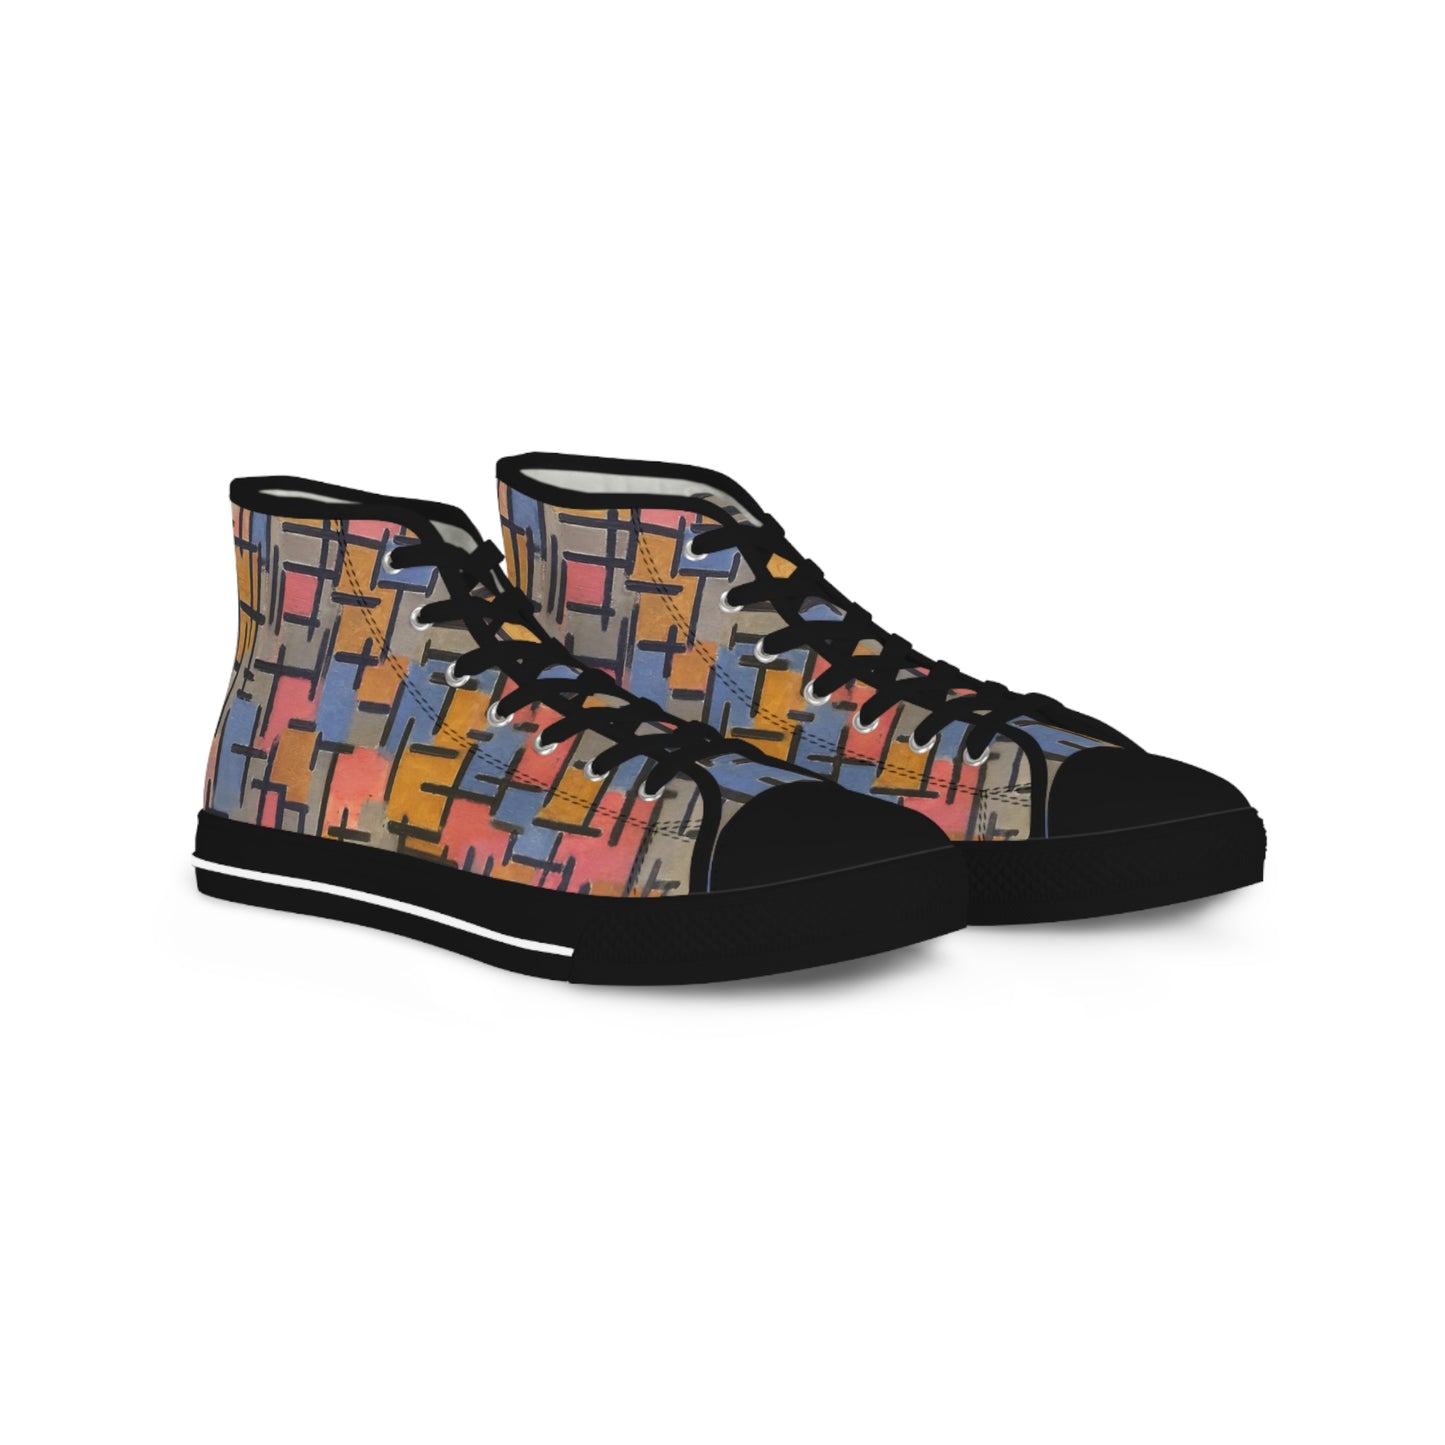 PIET MONDRIAN - COMPOSIZIONE - HIGH TOP SNEAKERS FOR HIM 